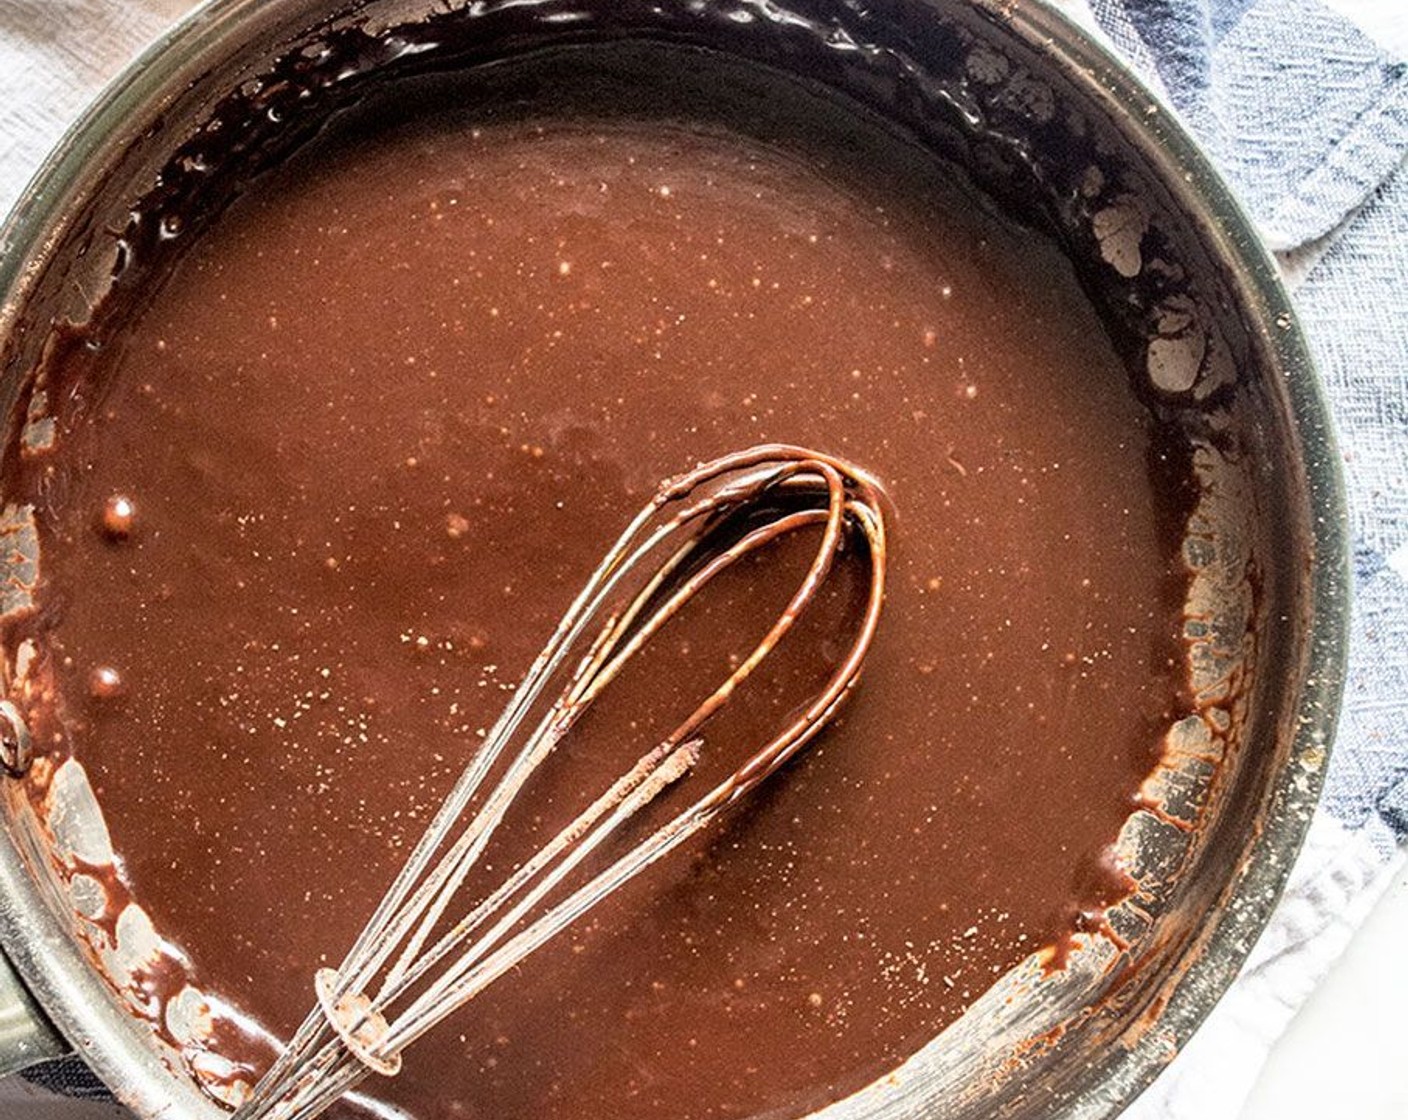 step 4 Remove from heat and slowly stir in Cacao Powder (1/3 cup) along with Vanilla Extract (1/2 tsp) and Sea Salt (1/4 tsp). Whisk until combined.